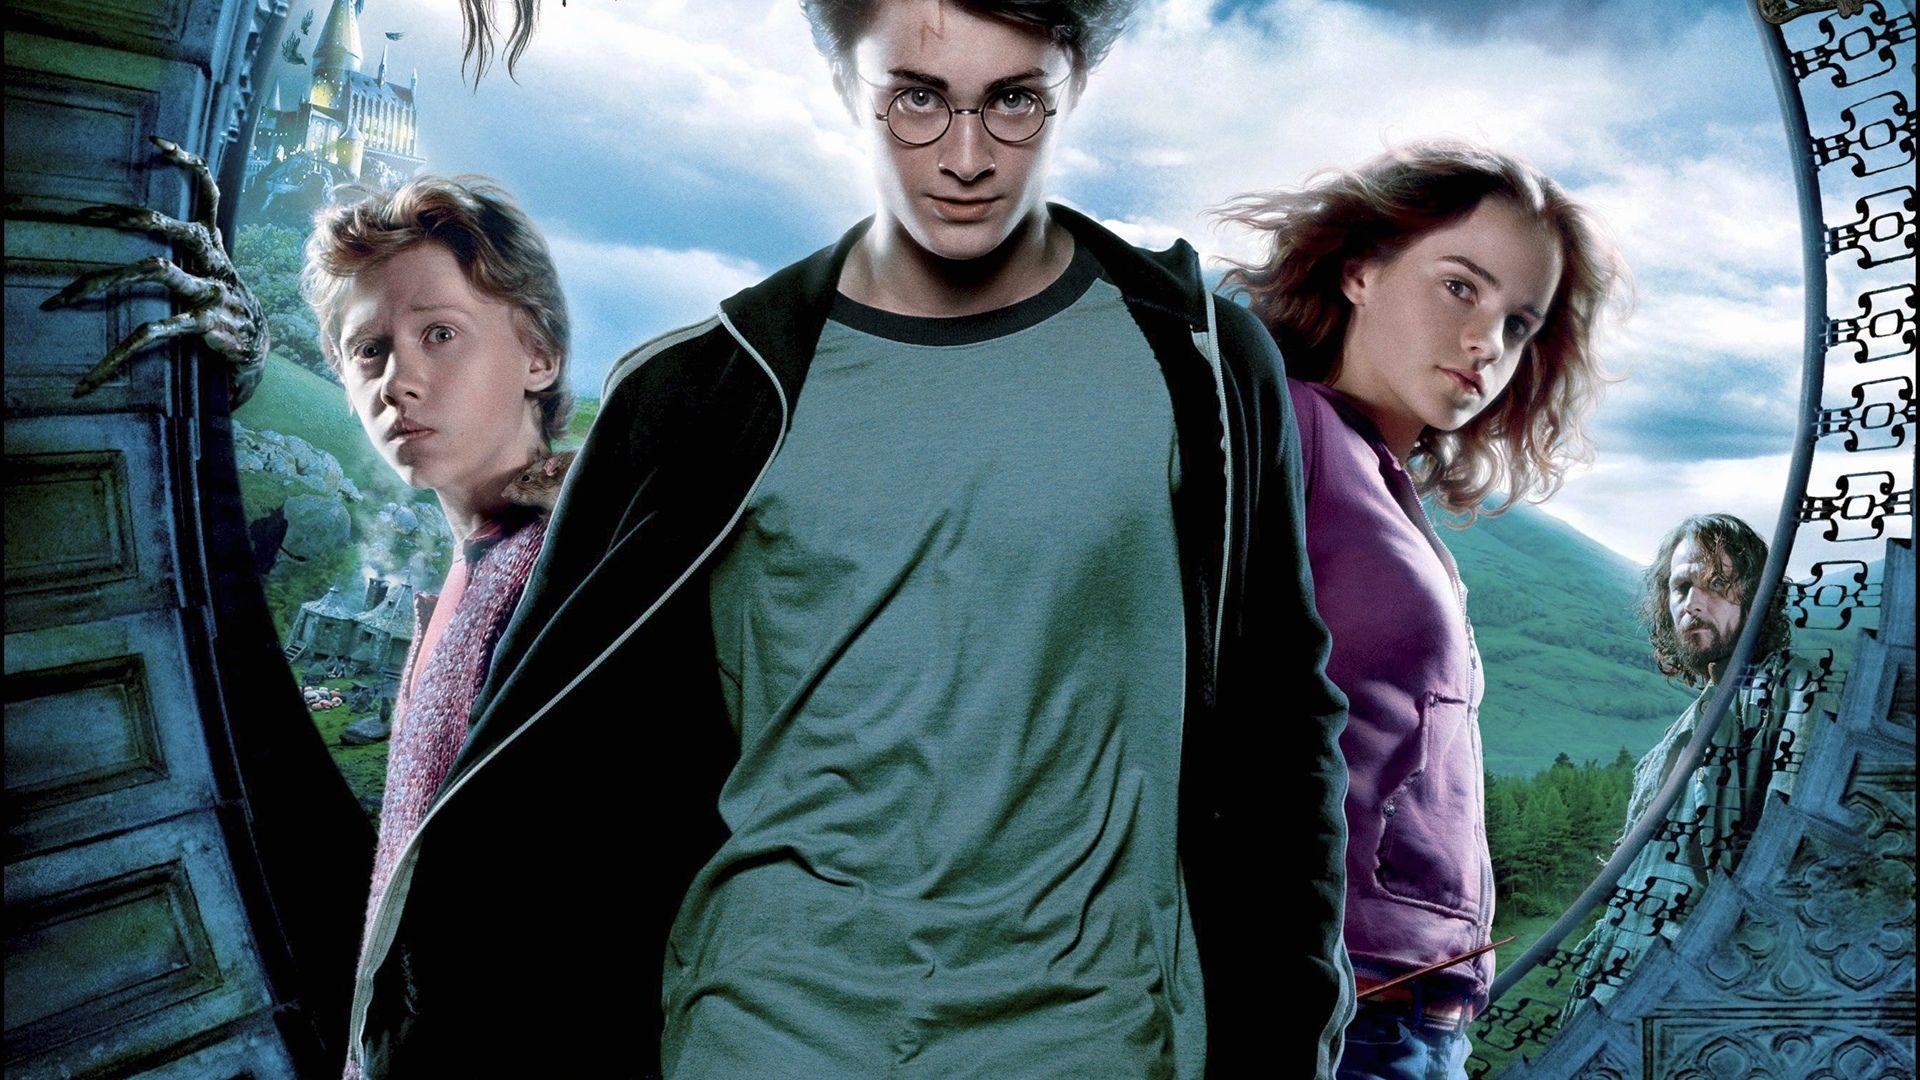 HD Harry Potter Wallpapers 